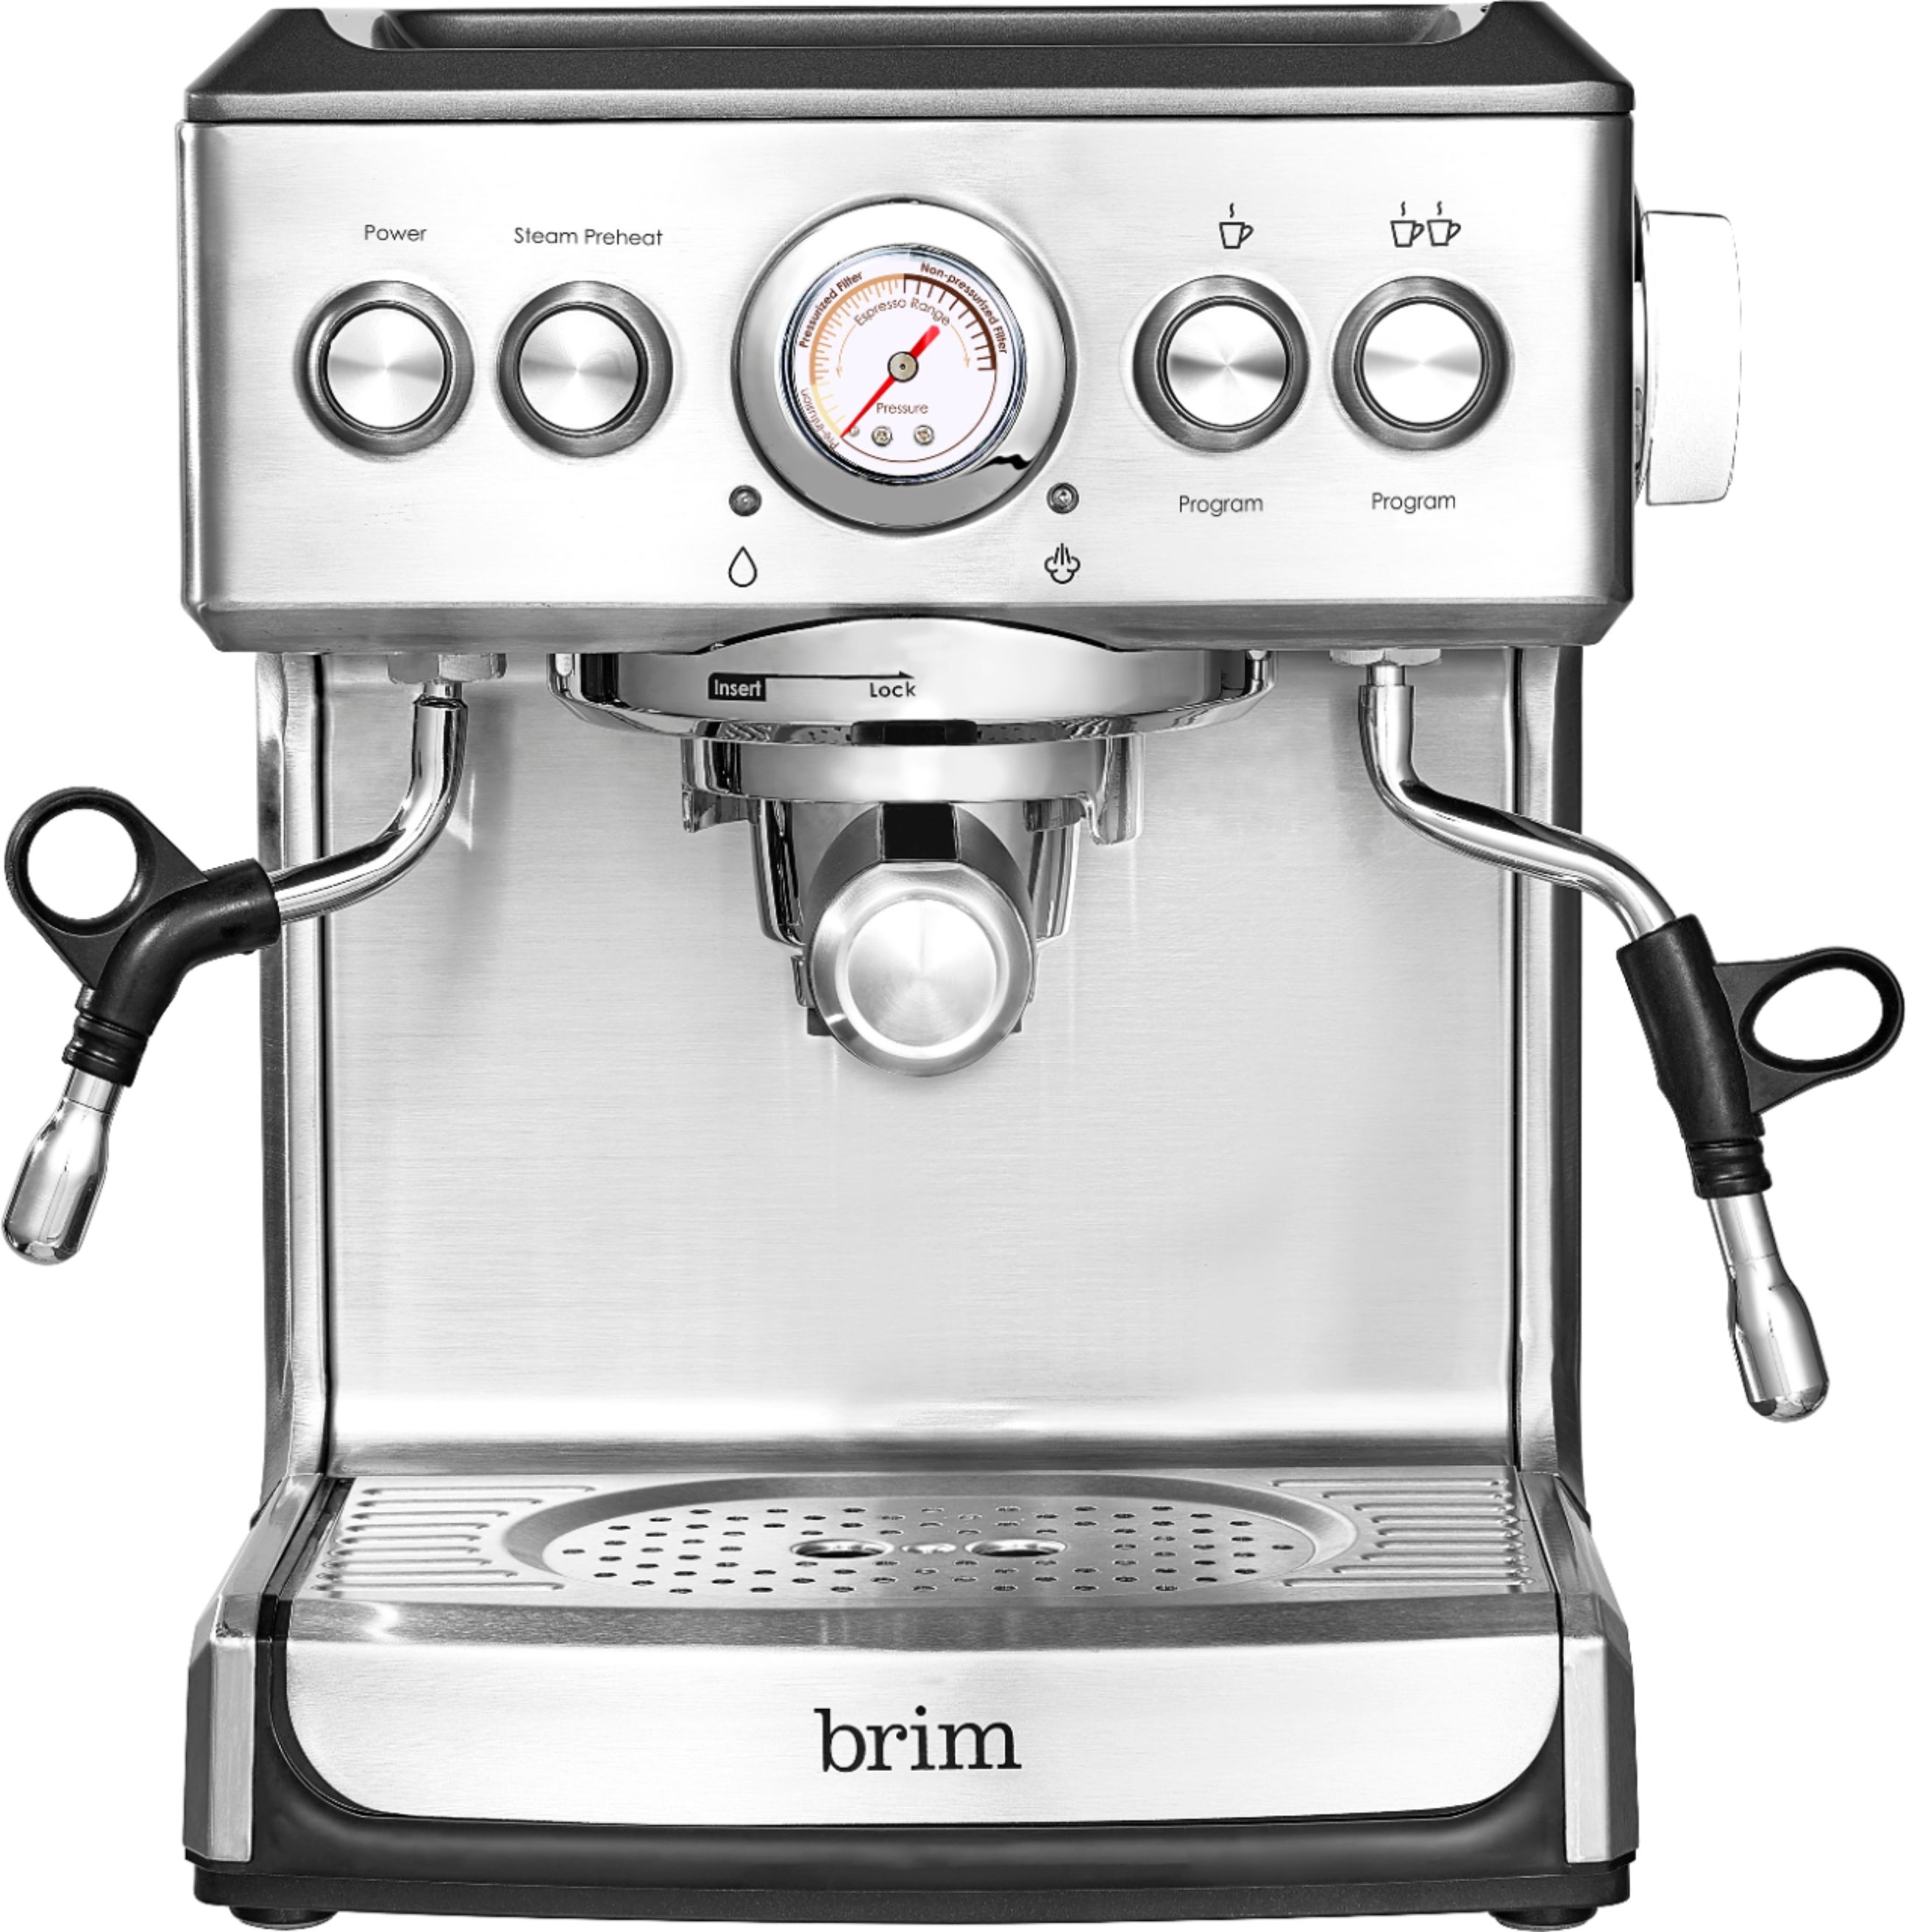 Thermador Espresso Machine with 19 bars of pressure, Milk Frother and App  Controlled Brushed Stainless Steel TCM24TS - Best Buy